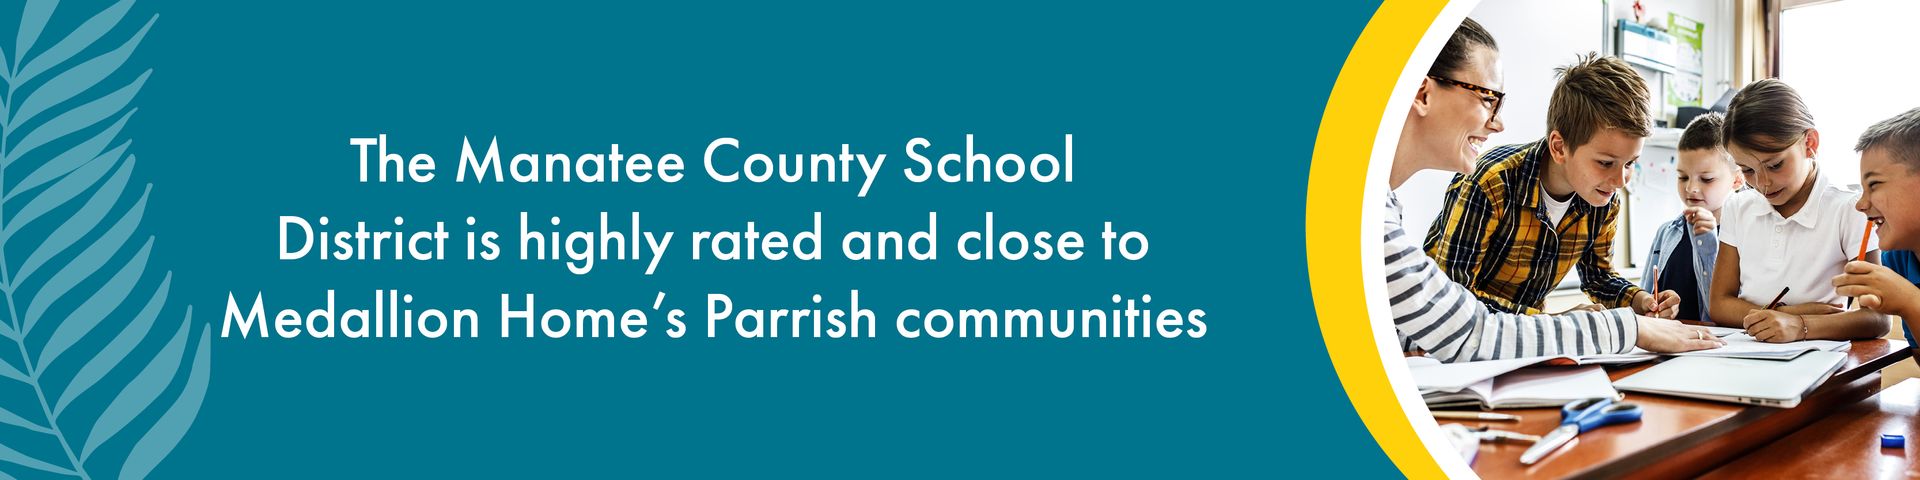 The Manatee County School District is highly rated and close to the Parrish communities